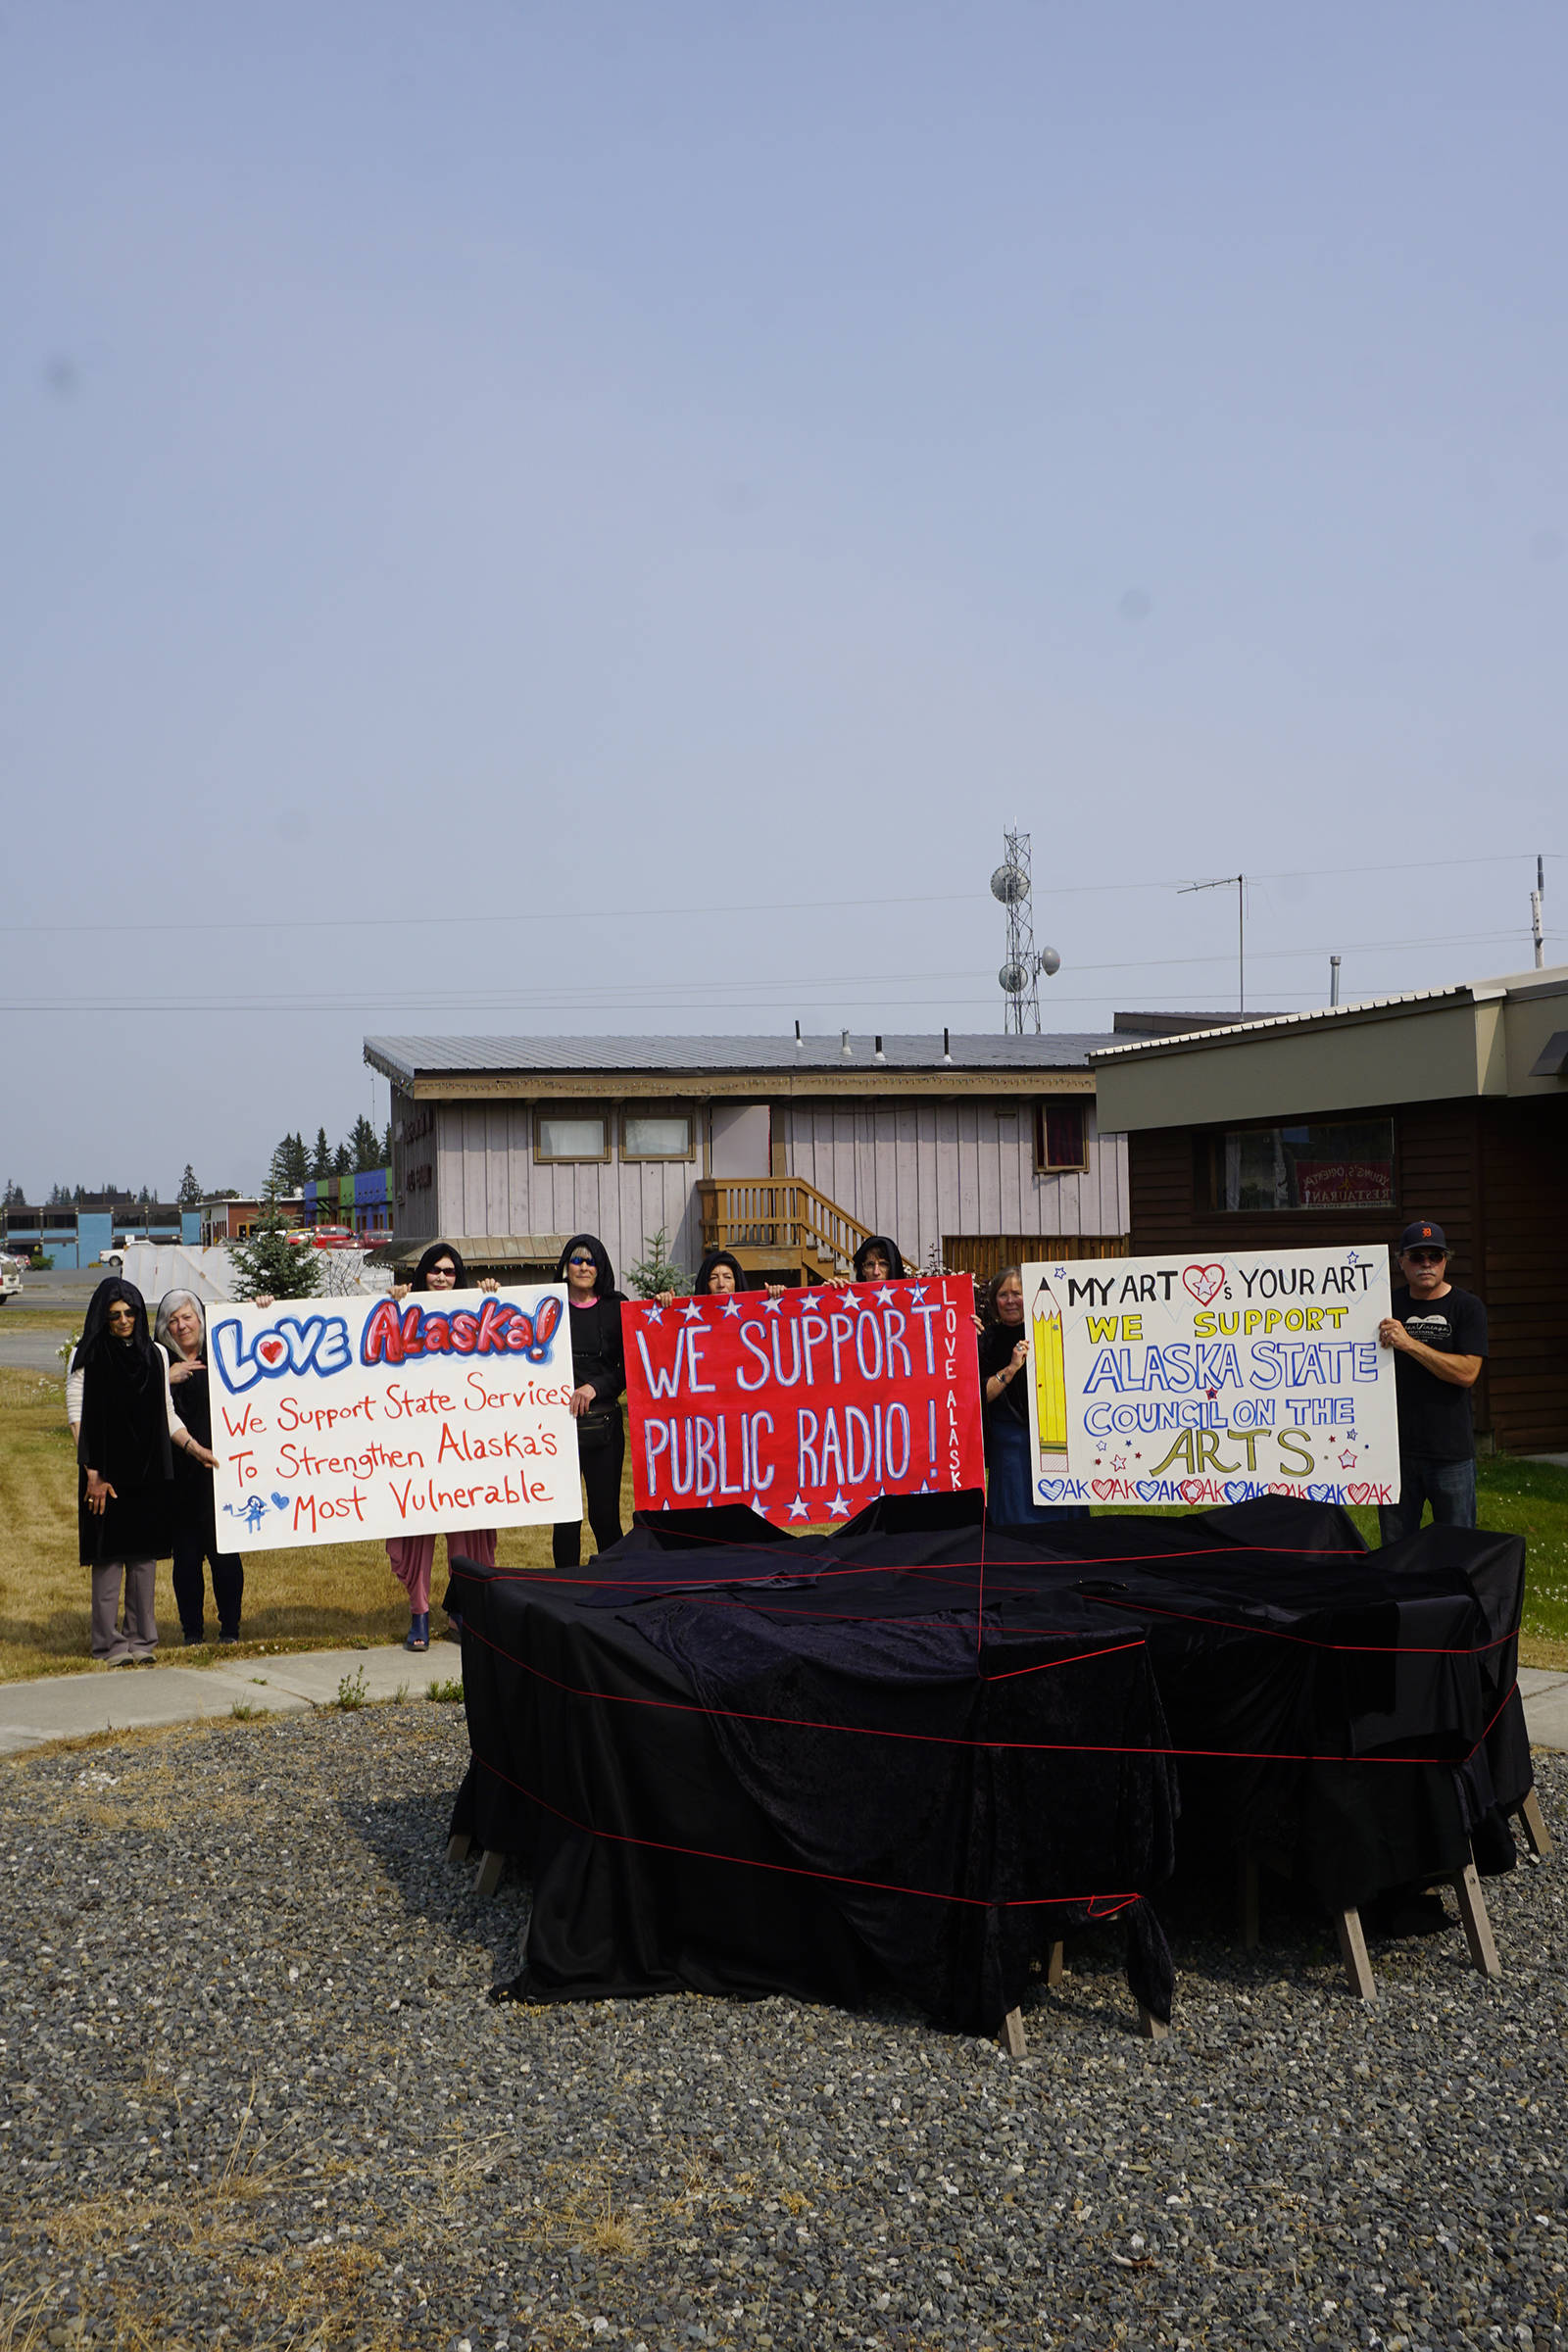 Arts supporters draped in black holds sings on July 9, 2019, by Sean Derry’s public art sculpture in Homer, Alaska, as part of a statewide art intervention to protest Gov. Mike Dunleavy’s veto of a $2.8 million state appropriation to the Alaska State Council on the Arts. They also supported a general override of Dunleavy’s vetoes that will affect funding for the University of Alaska, public radio and other programs. Derry’s sculpture was commissioned as a 1% for art project associated with the remodeling of Pioneer Hall at the Kachemak Bay Campus, Kenai Peninsula College, University of Alaska. The protest was not sanctioned by the college. (Photo by Michael Armstrong/Homer News)